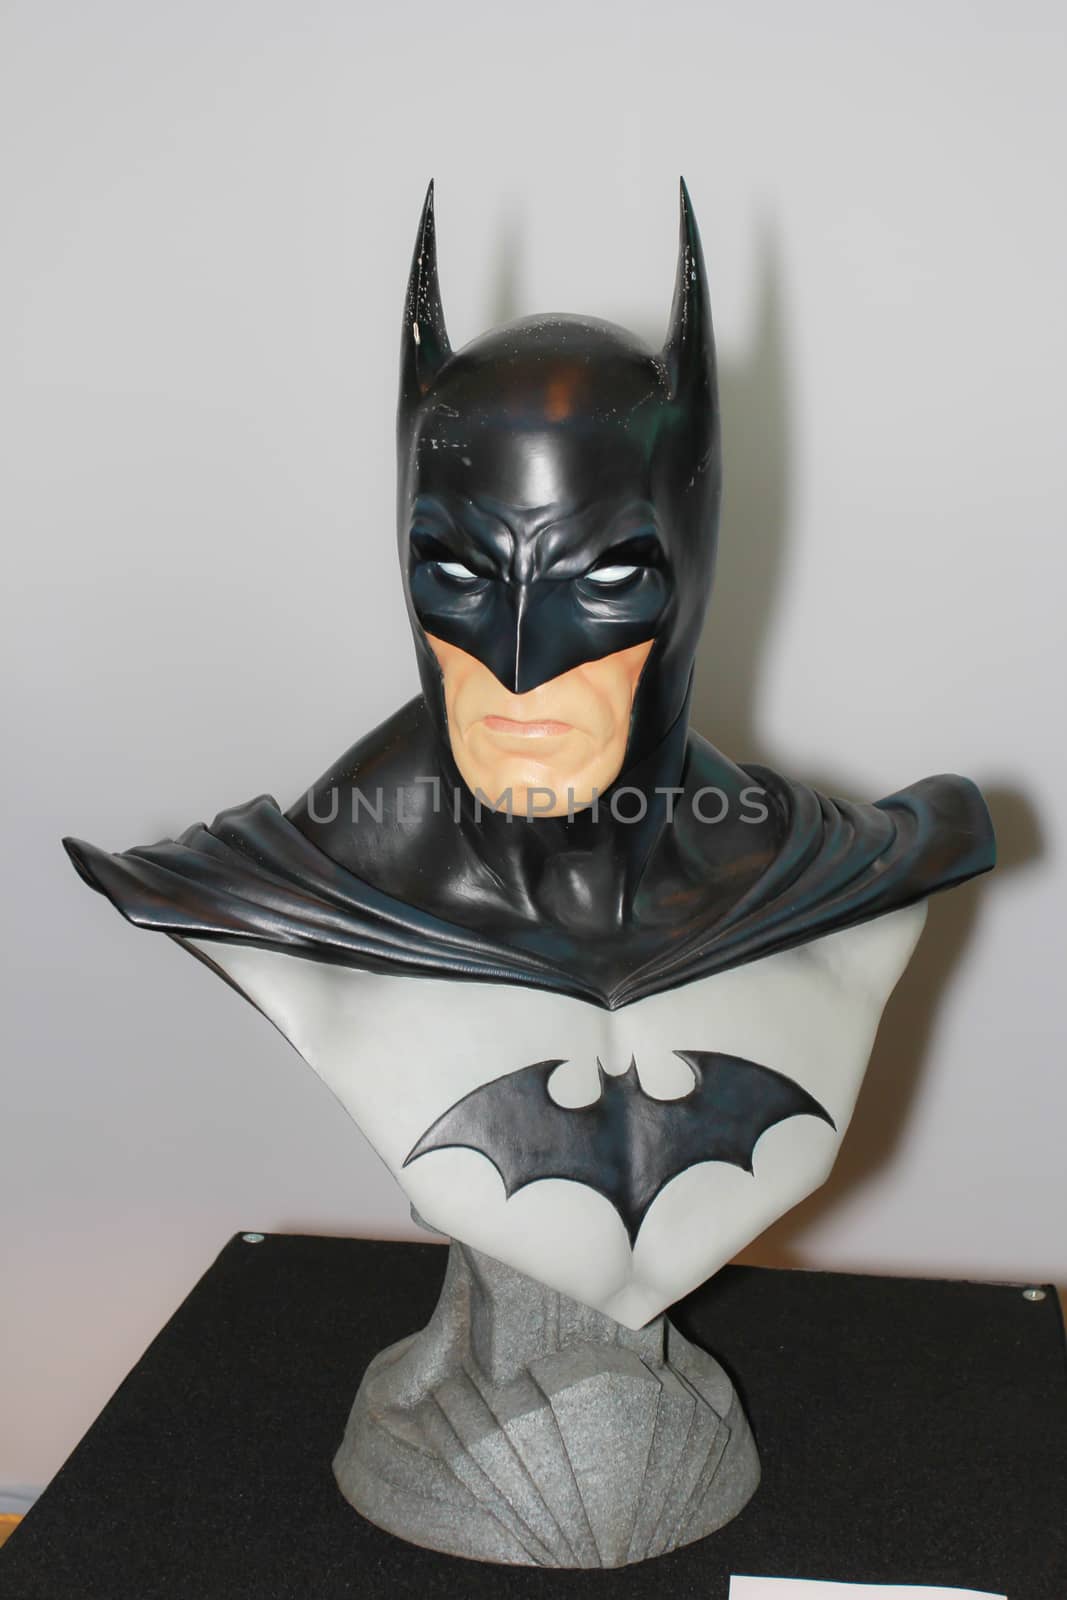 A model of the character Batman from the movies and comics  by redthirteen